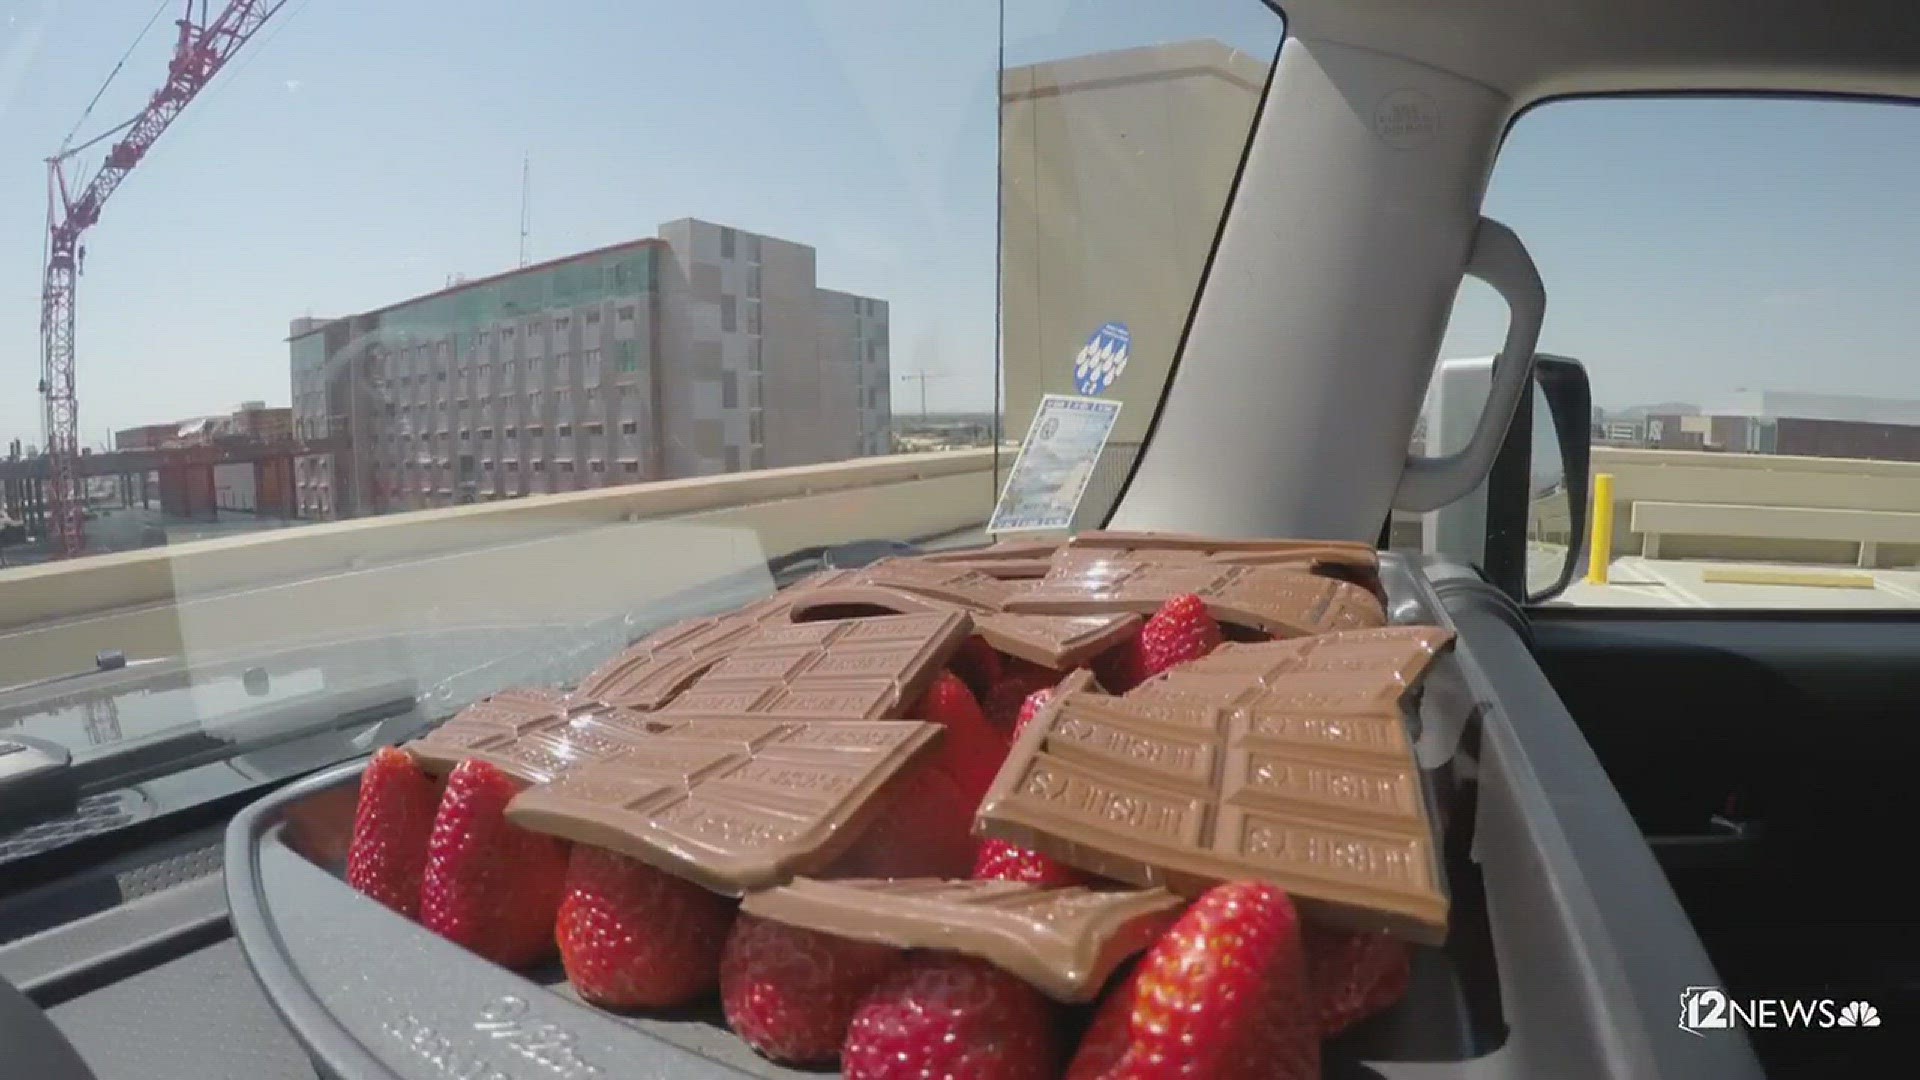 12 News melts chocolate over strawberries in hot car